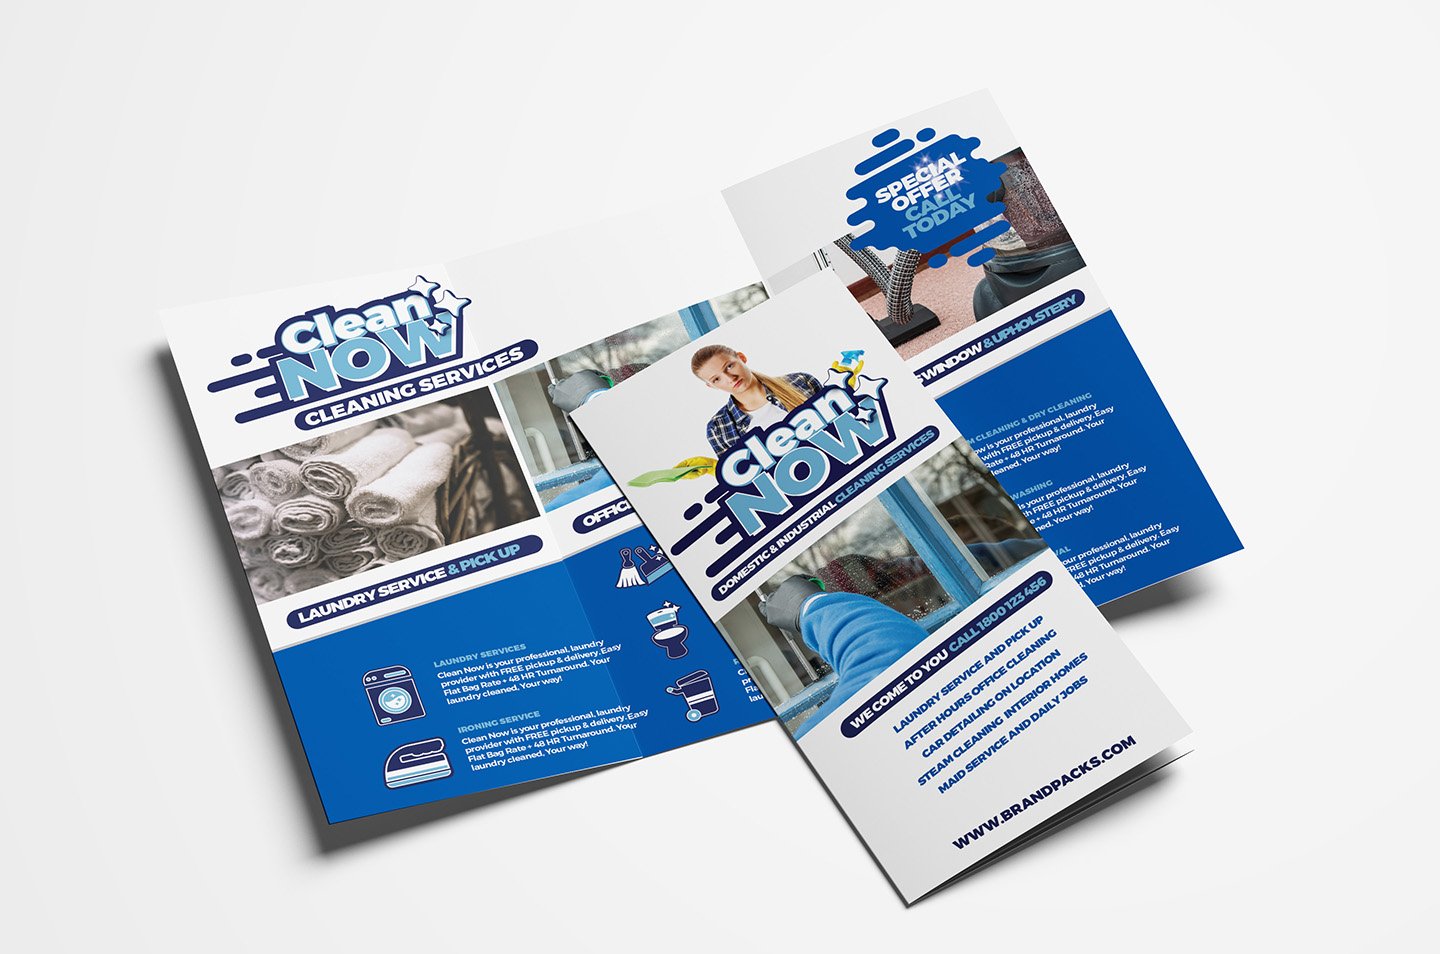 Cleaning Service Tri Fold Brochure cover image.